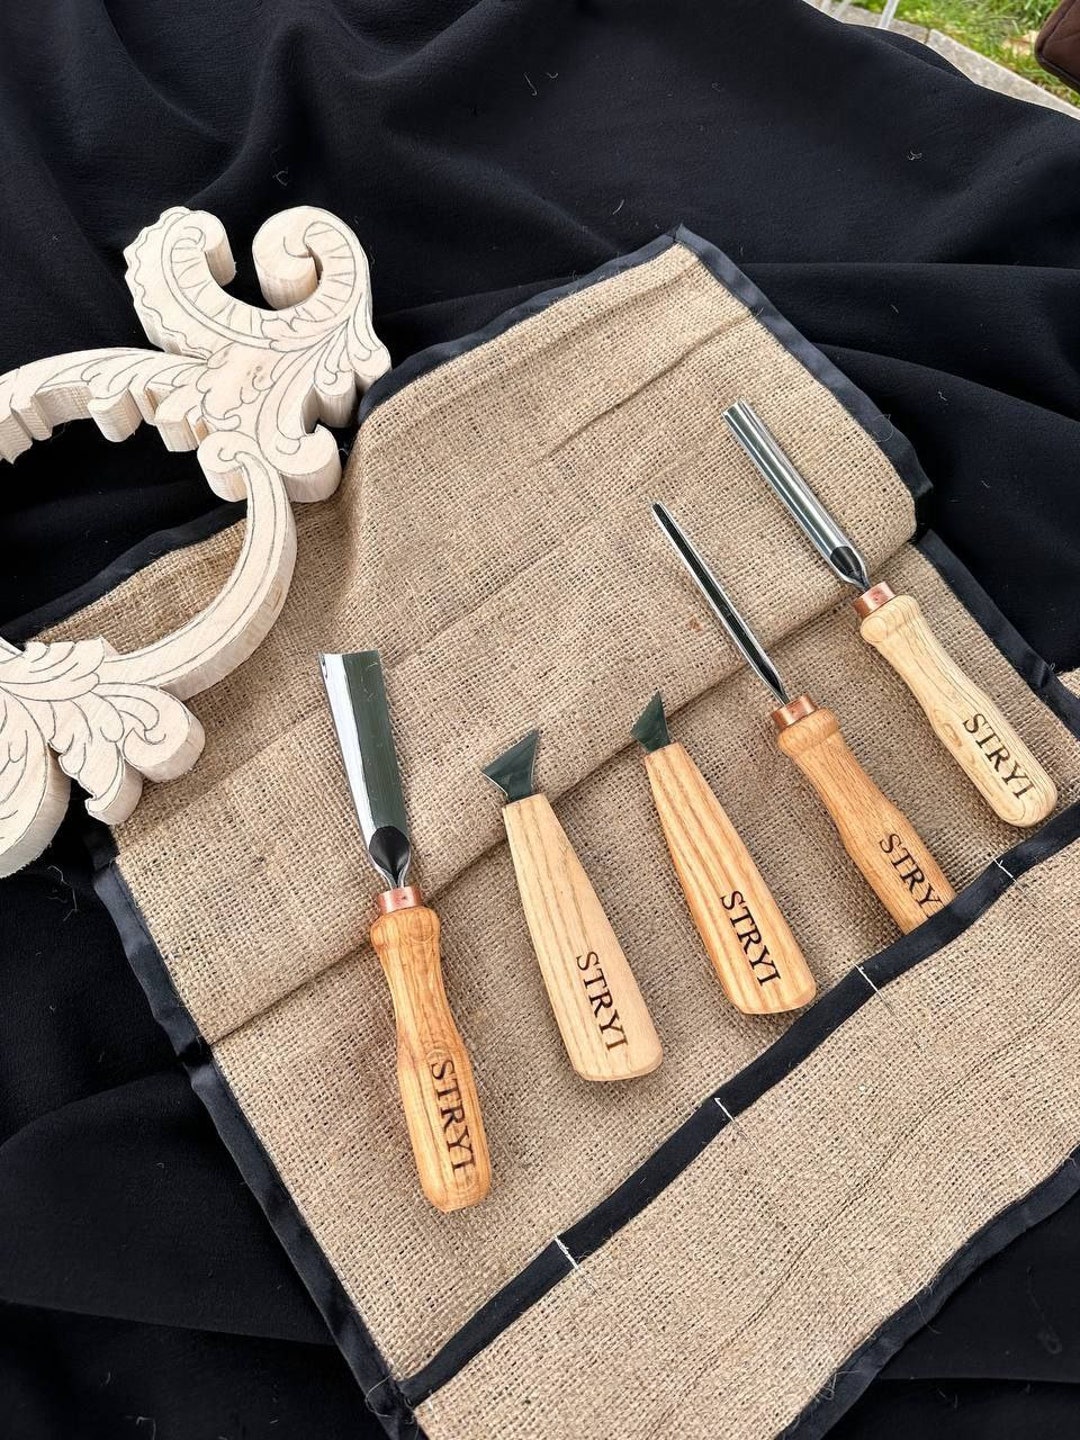 Stryi 5 Piece Spoon Carving Set Review